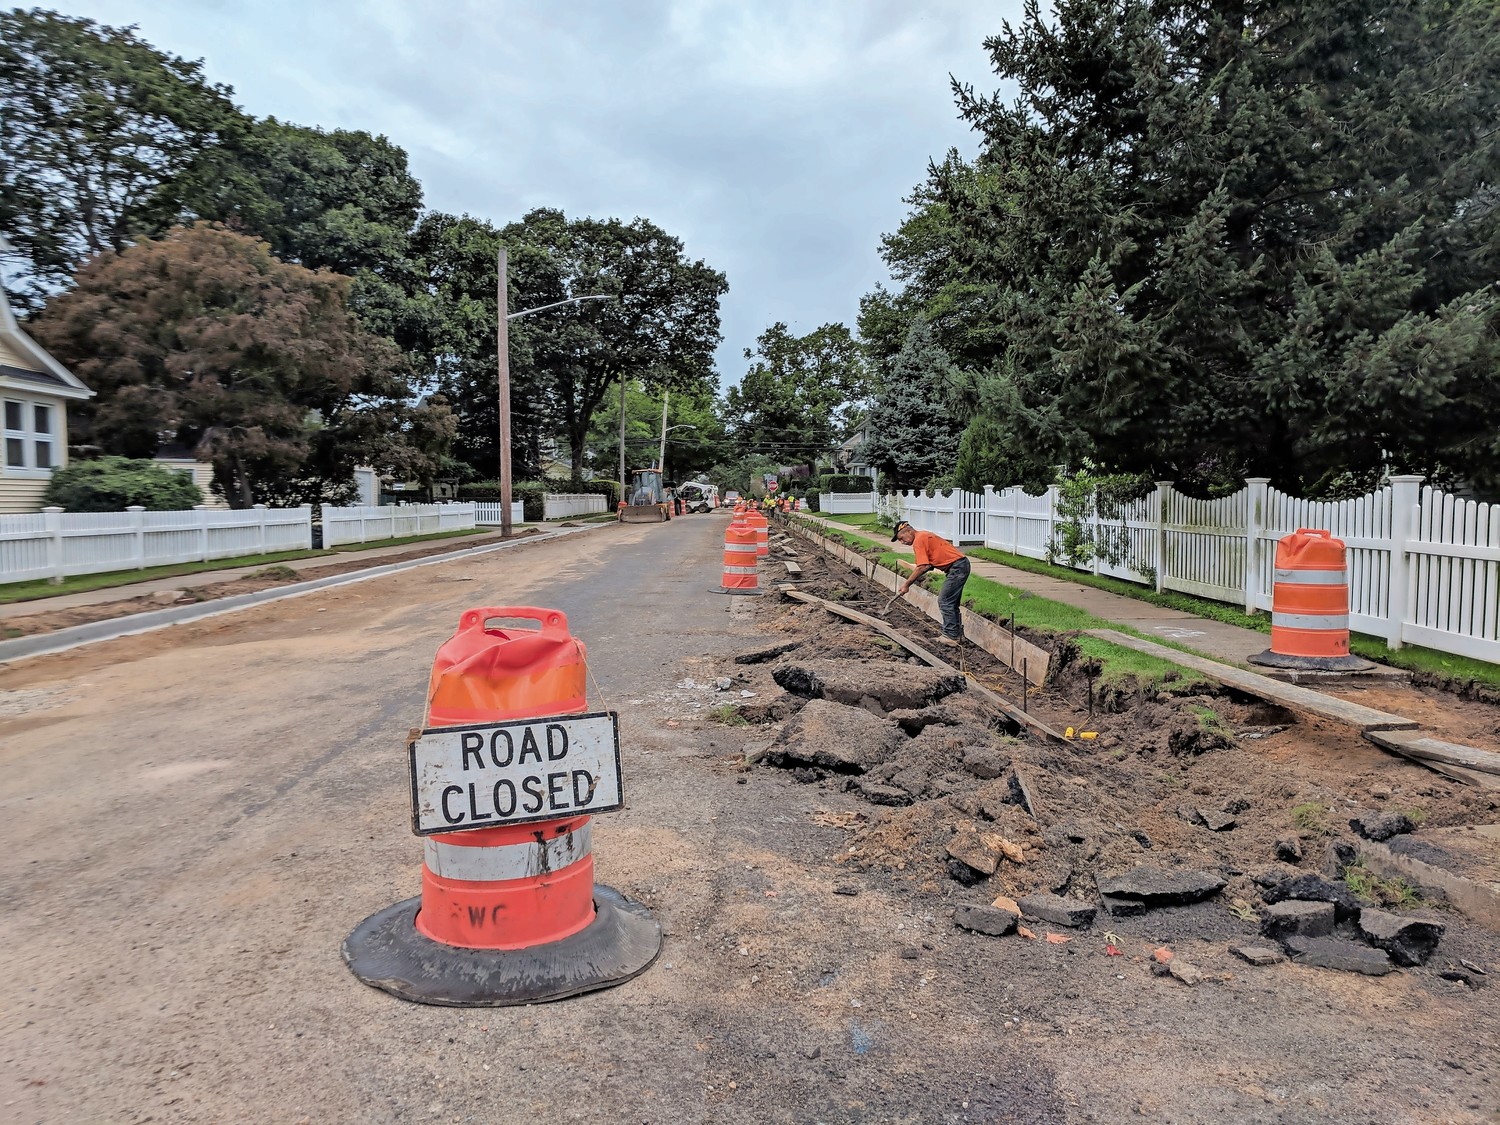 Roadwork took place last week on Locust Avenue, a street initially lined with towering trees, most of which were removed due to disease or complications with the infrastructure underneath.